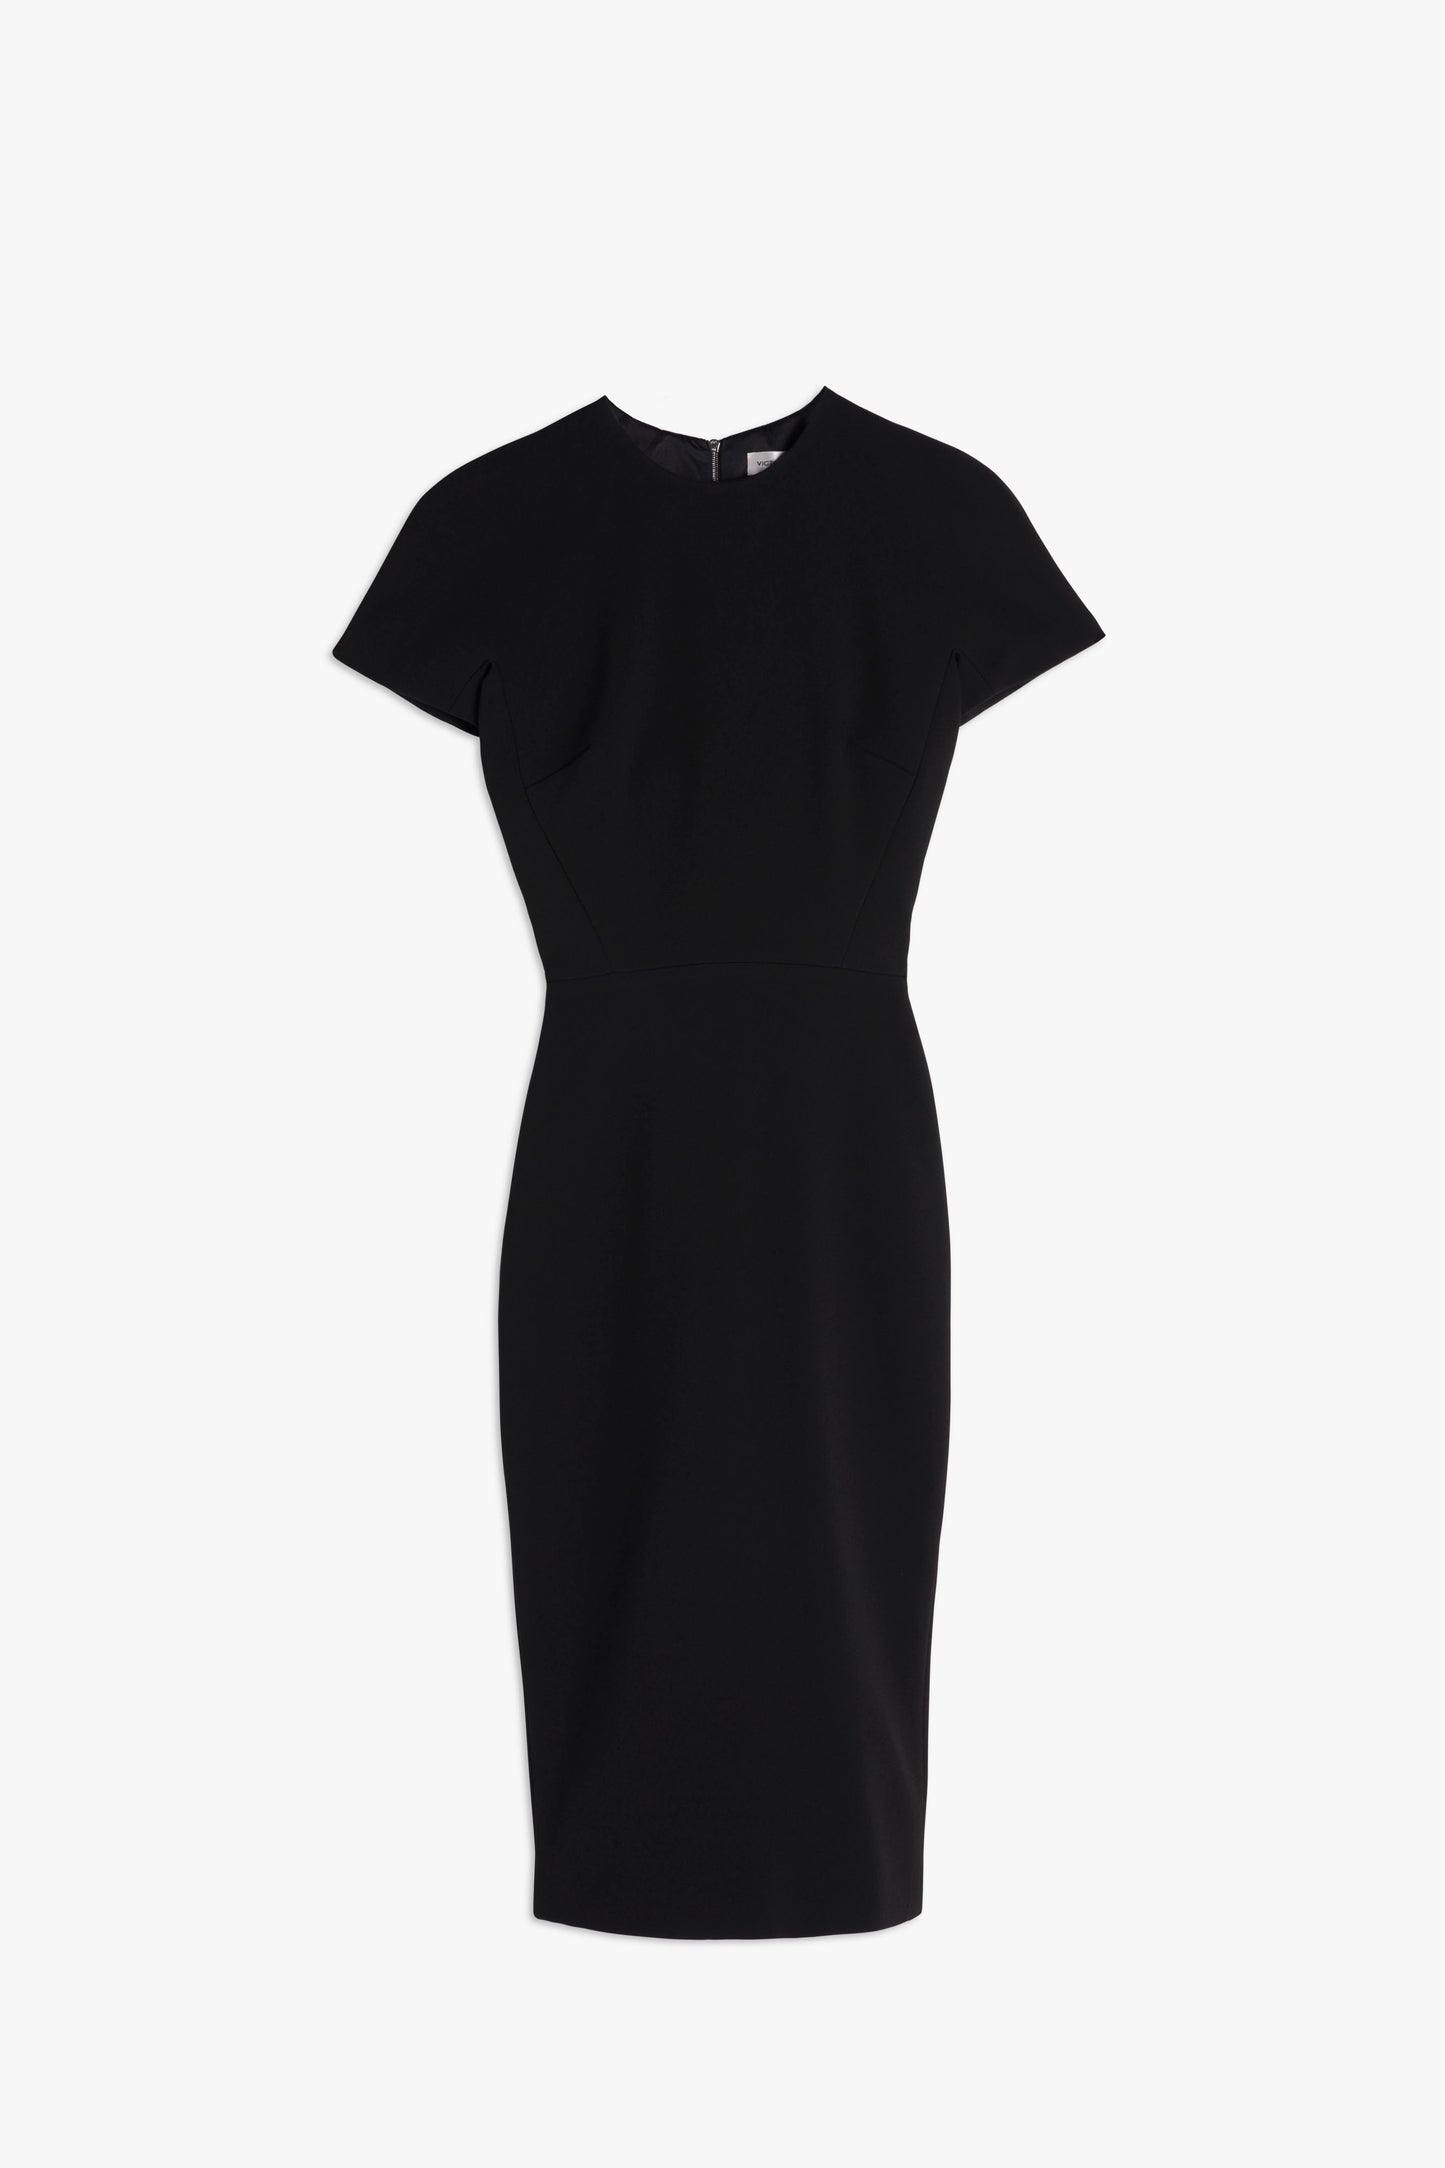 A black knee-length Victoria Beckham fitted T-shirt dress with short sleeves and a matte bonded crepe texture, displayed against a plain white background.